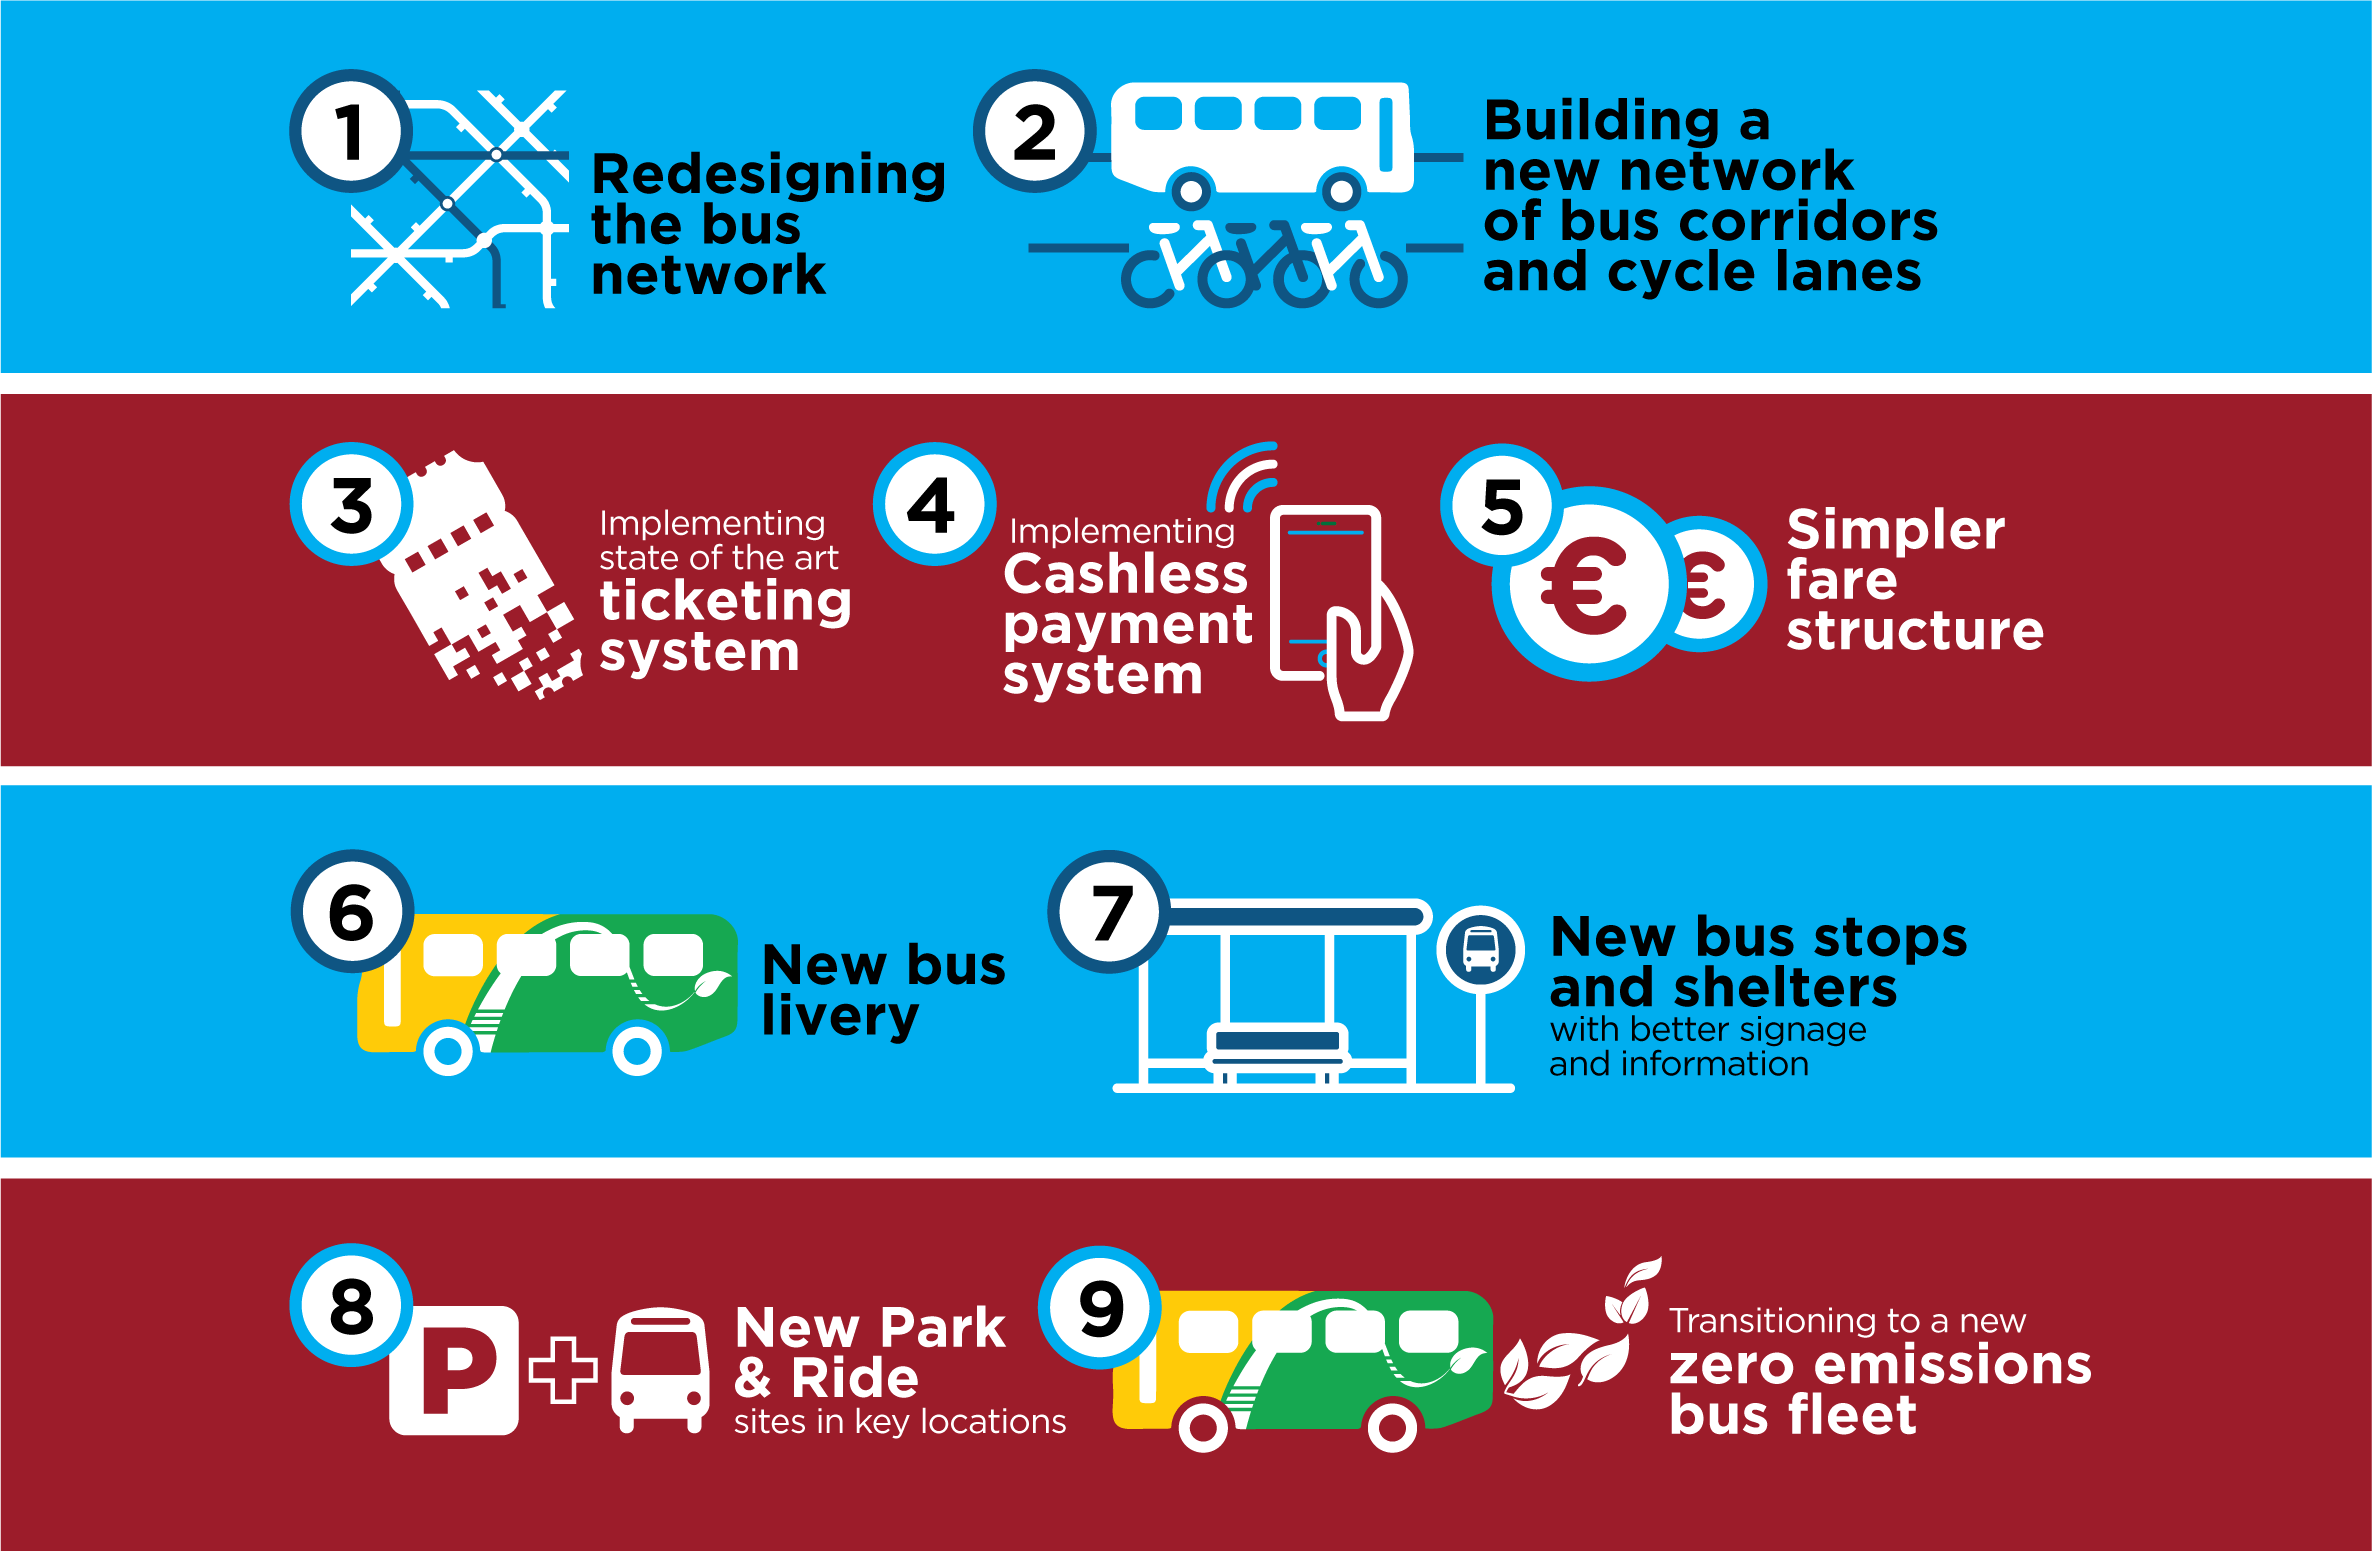 BusConnects|BusConnects will overhaul the current bus system with nine types of improvement and investment. These include: 1. Completely redesigning the bus network. 2. Building a network of new bus and cycle corridors. 3. New state-of-the-art ticketing system. 4. Implementing cashless payment system. 5. Revamping the fare system. 6. New bus livery. 7. New bus stops and shelters with better signage and information. 8. New park and ride sites in key locations. 9.Transitioning to a new zero emissions bus fleet.